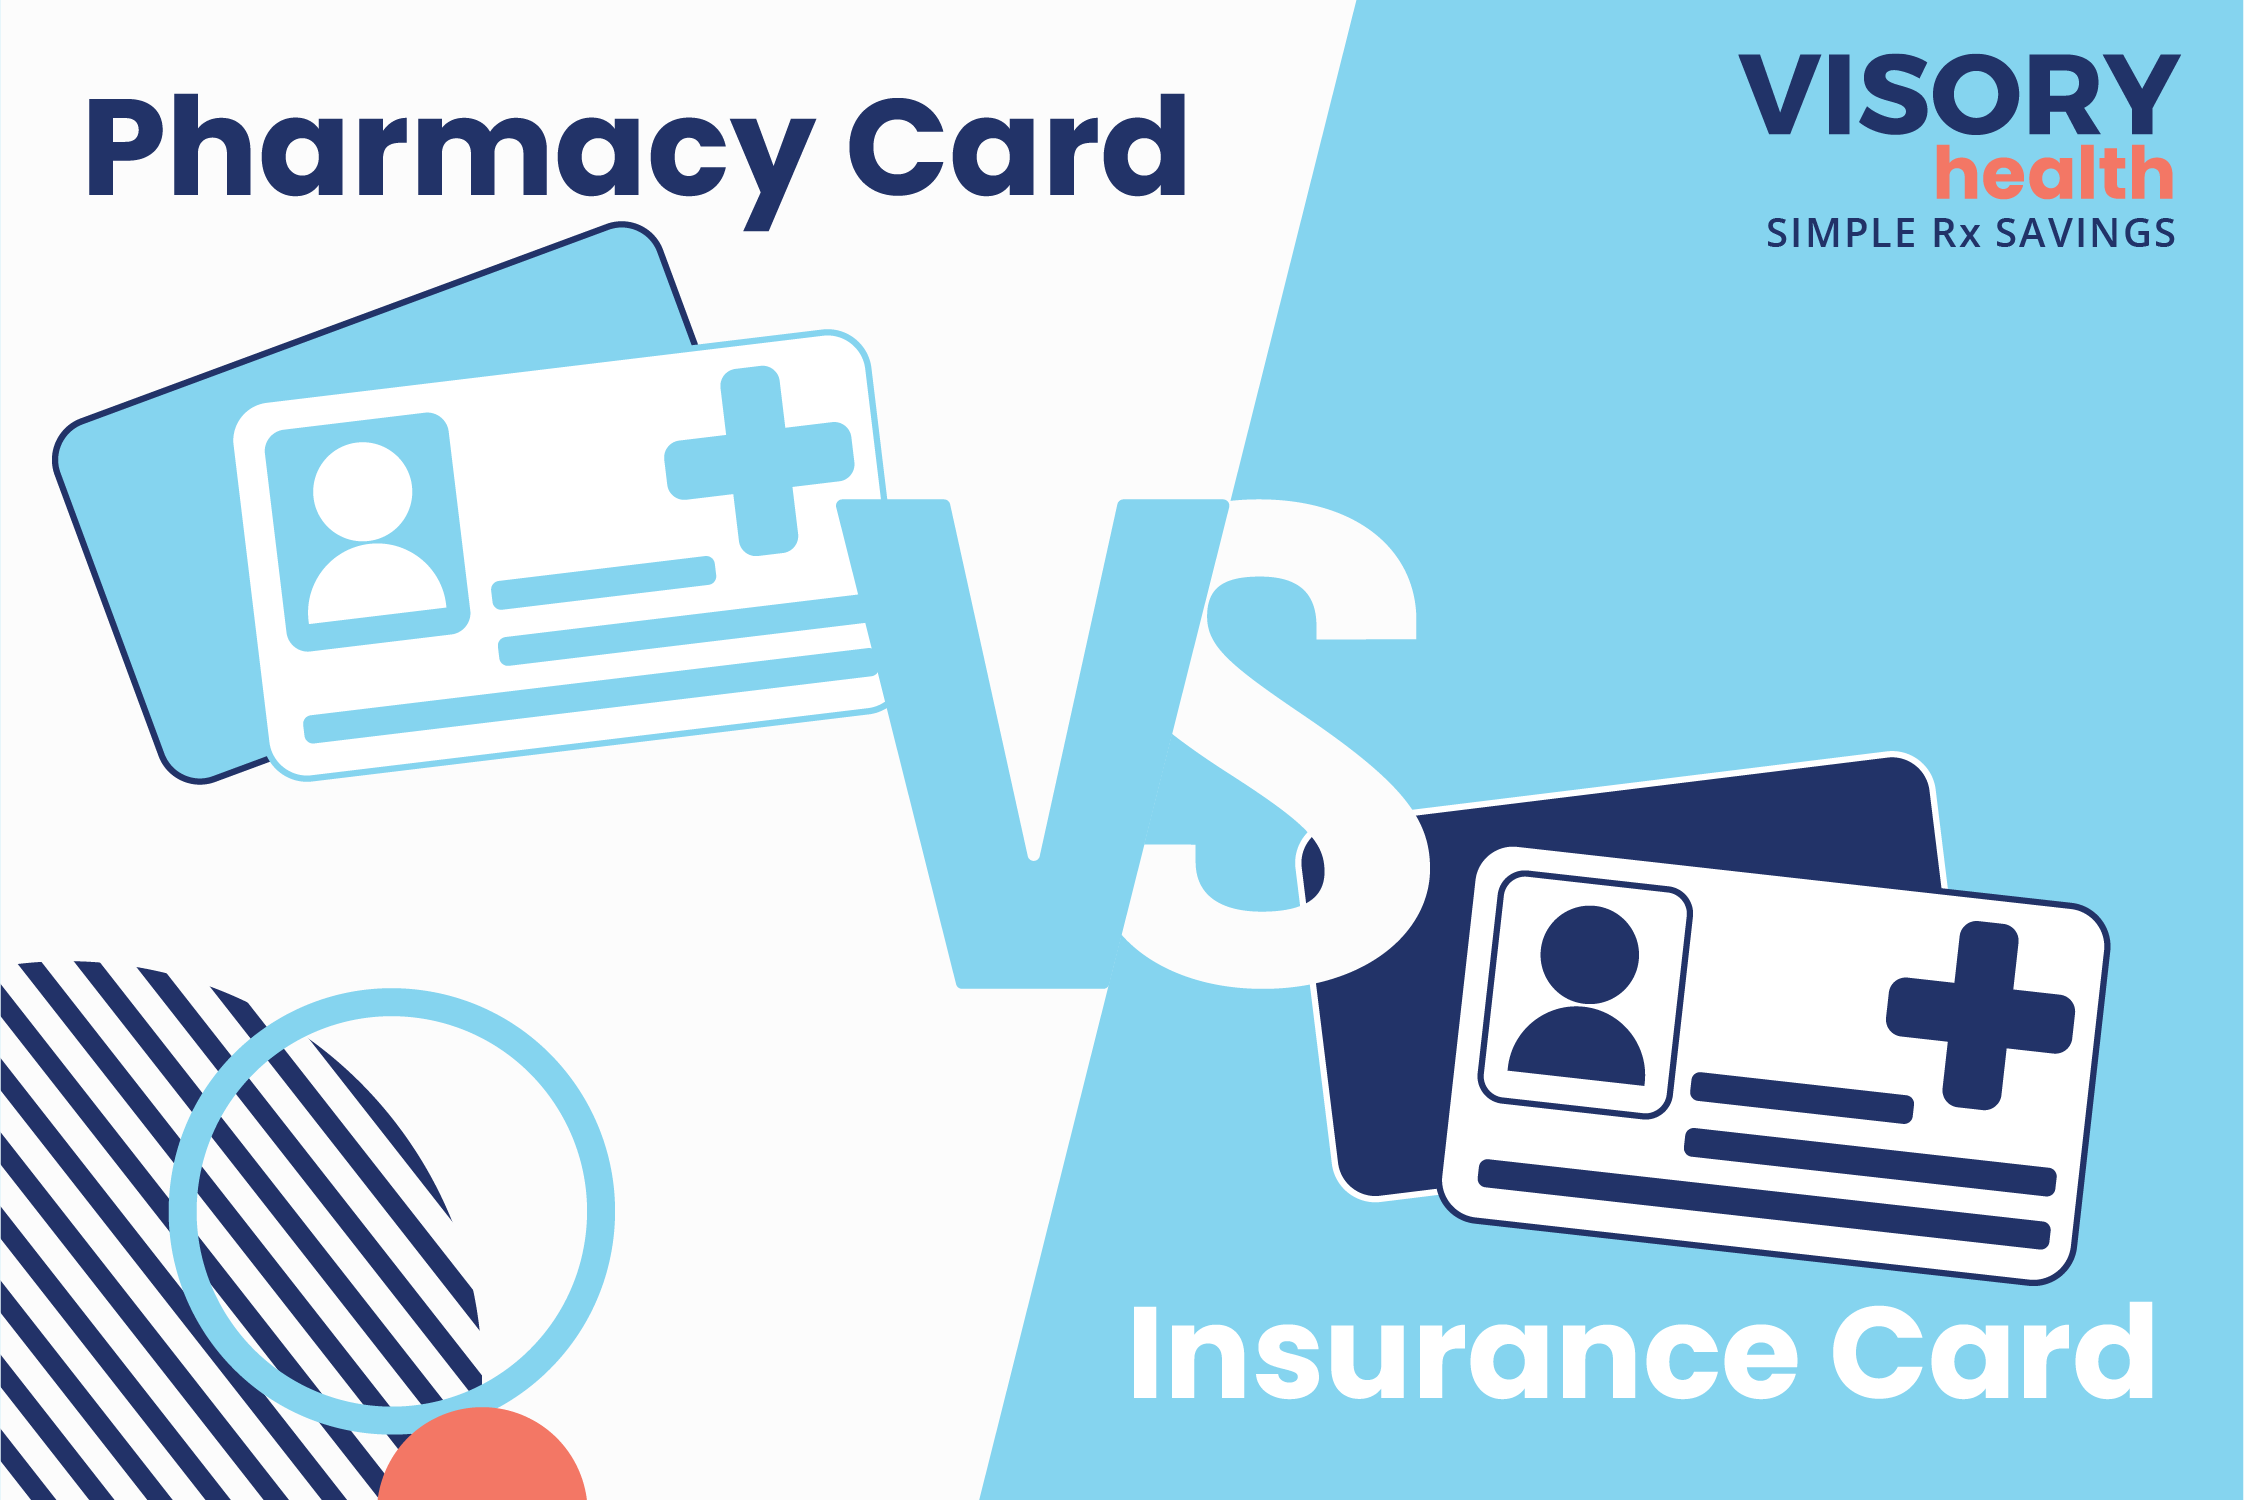 Visory Health Blog - Pharmacy Cards VS Insurance Cards - Whats the difference?